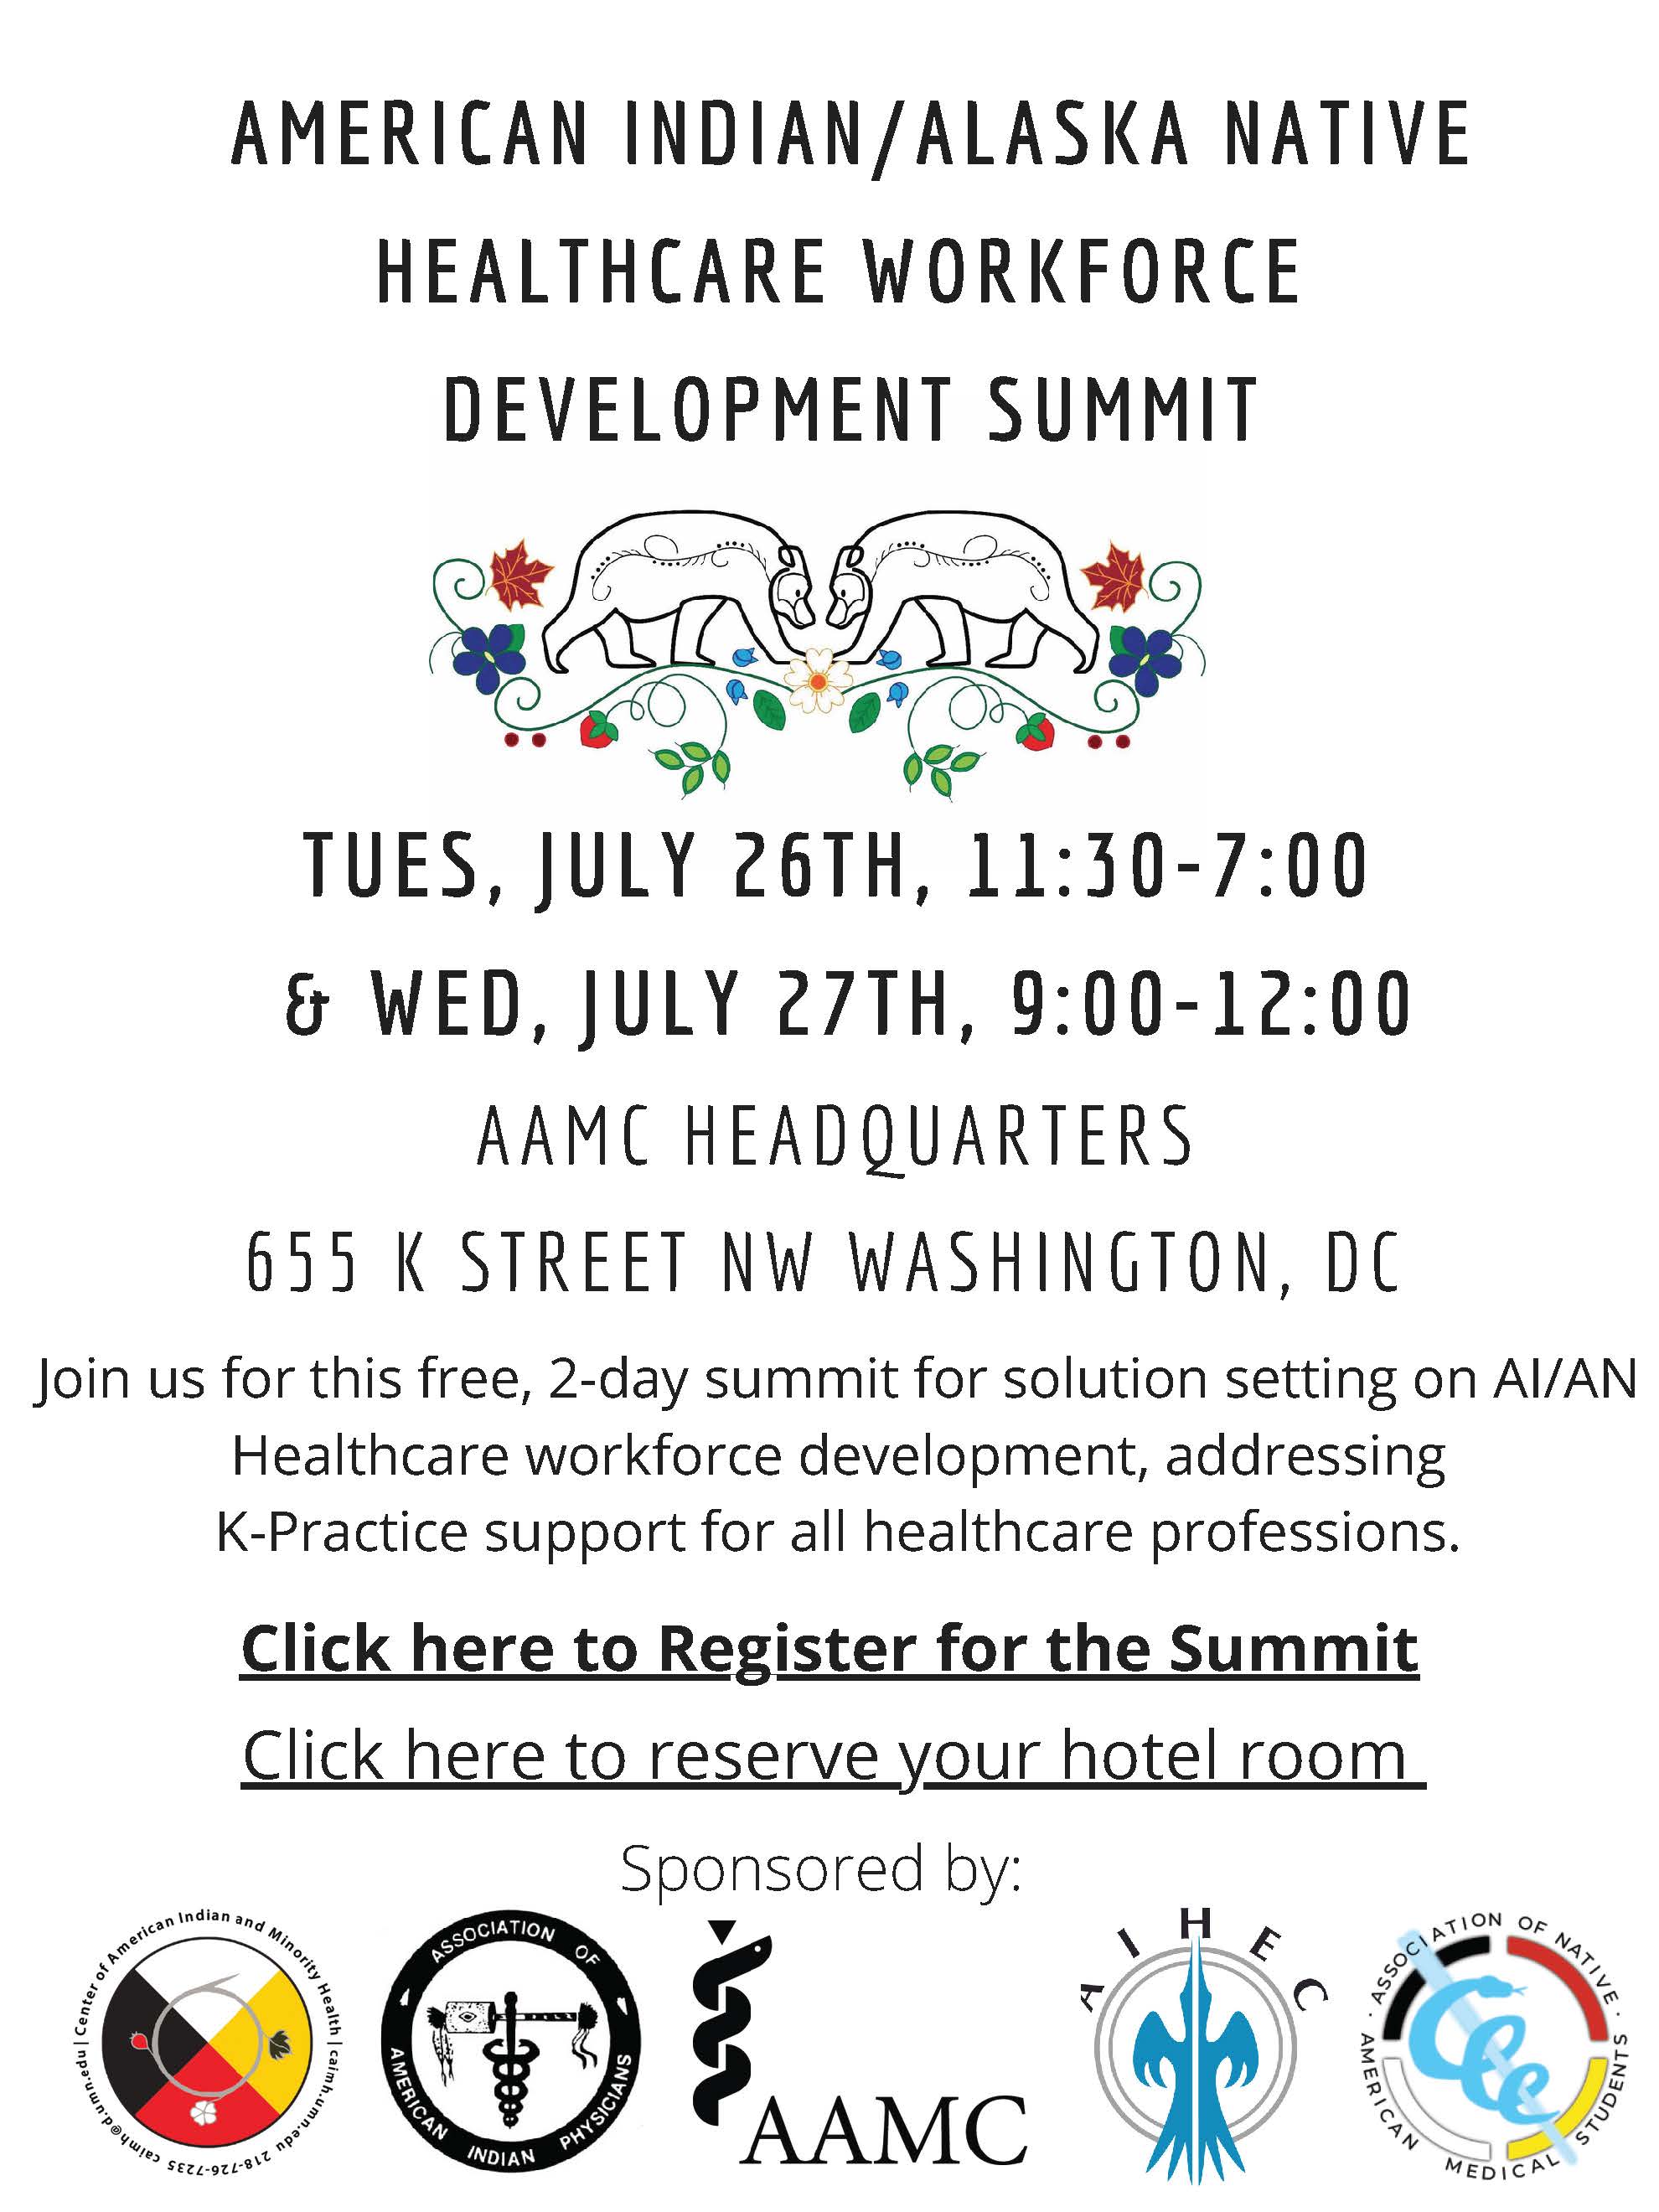 Summit Flyer for July 25th/26th